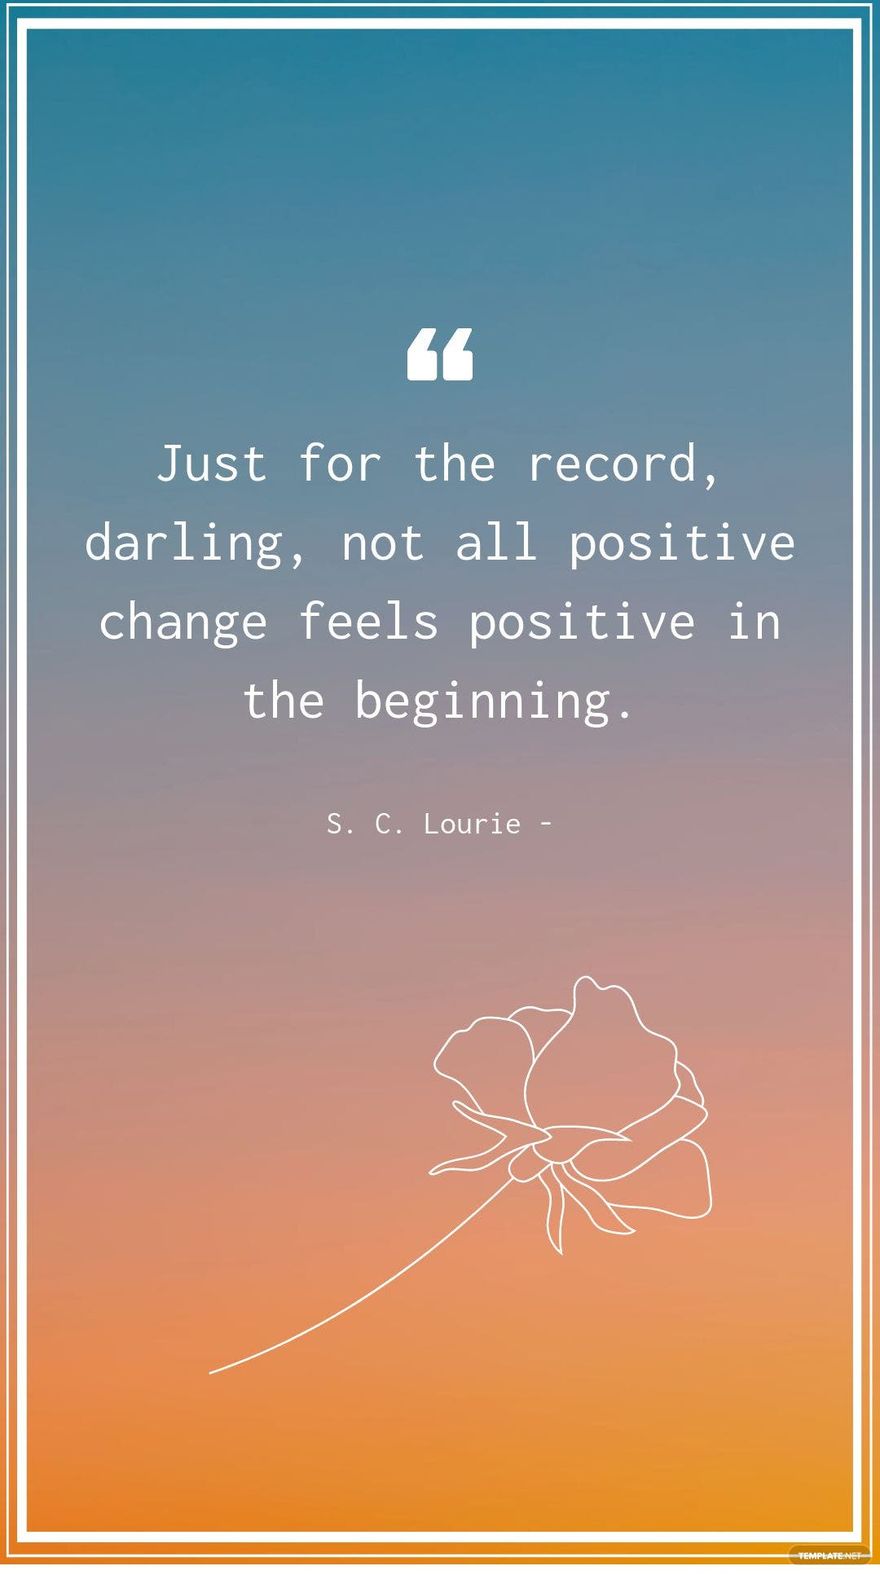 S. C. Lourie - Just for the record, darling, not all positive change feels positive in the beginning.